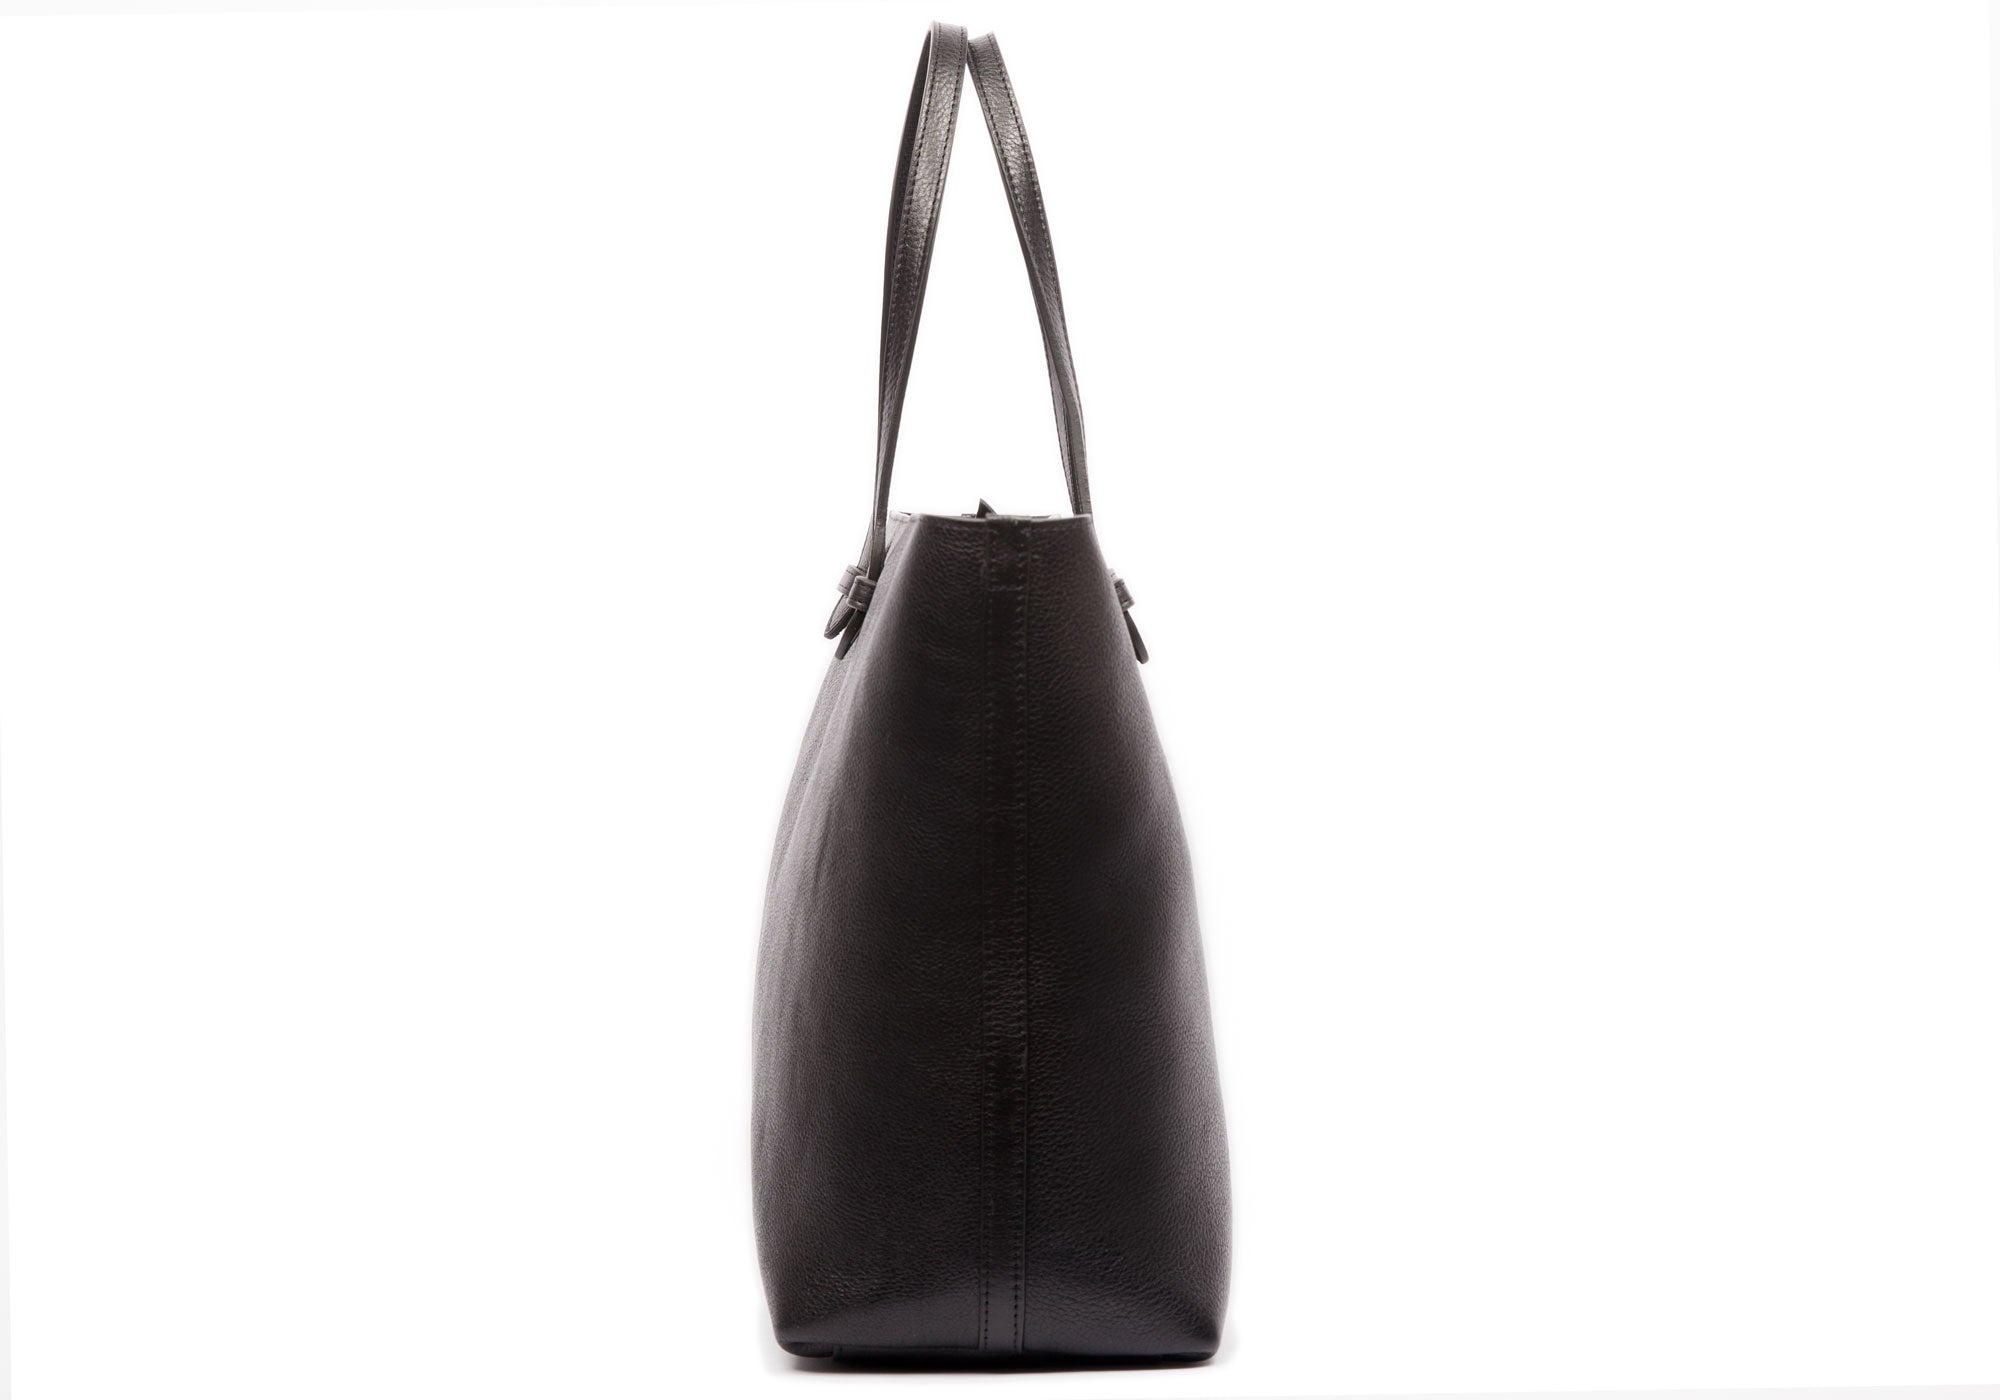 No. 12 Leather Tote